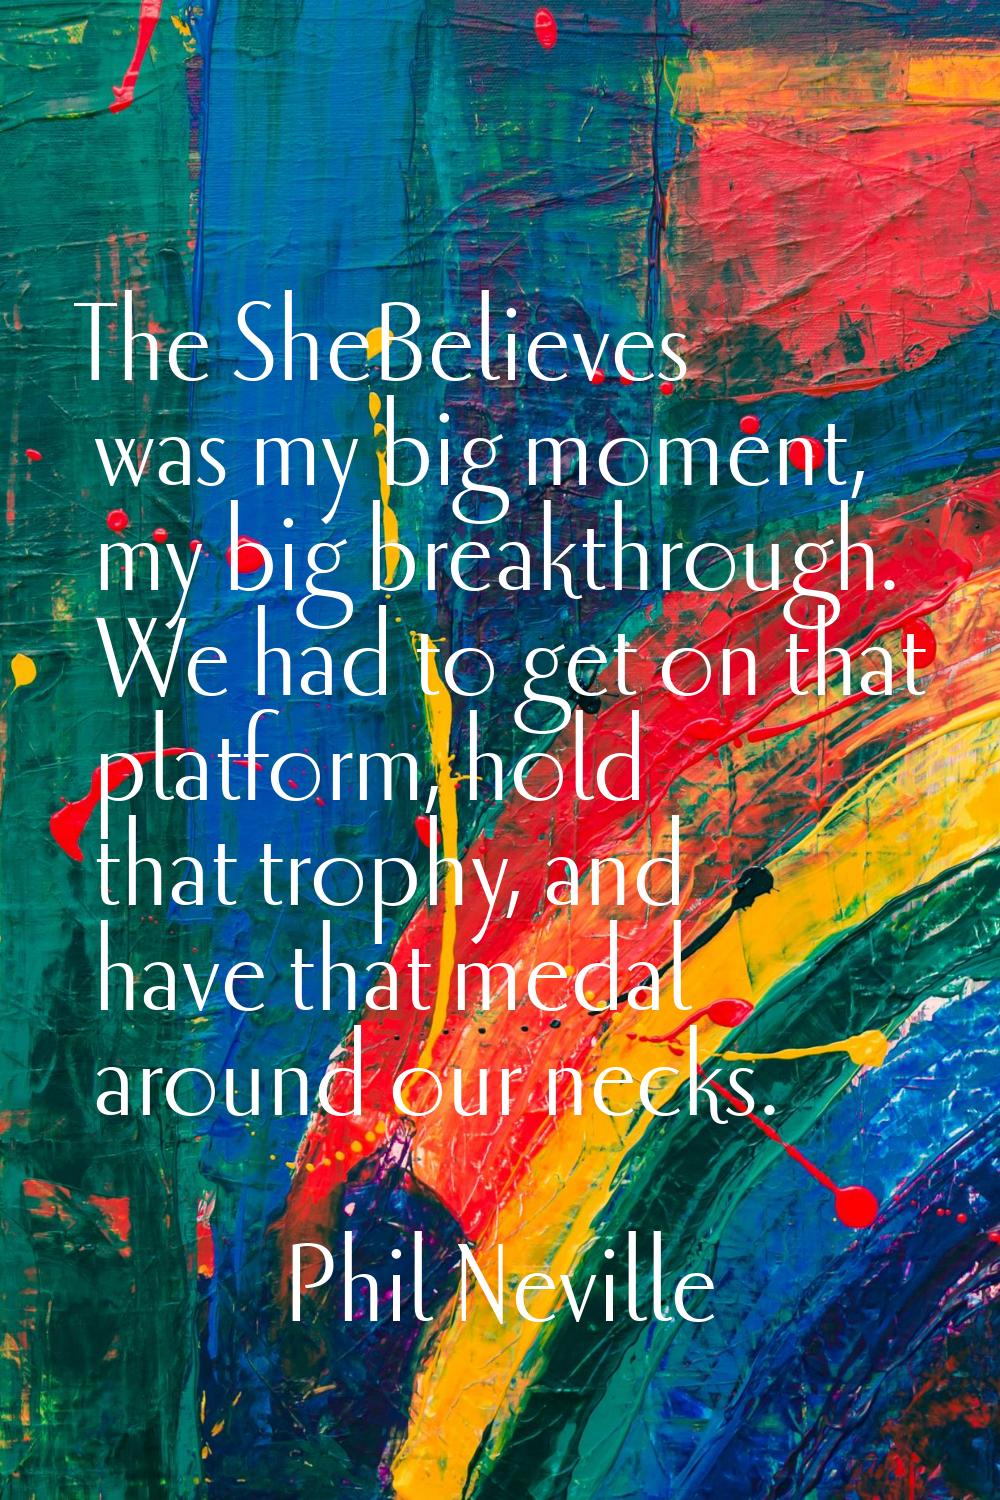 The SheBelieves was my big moment, my big breakthrough. We had to get on that platform, hold that t